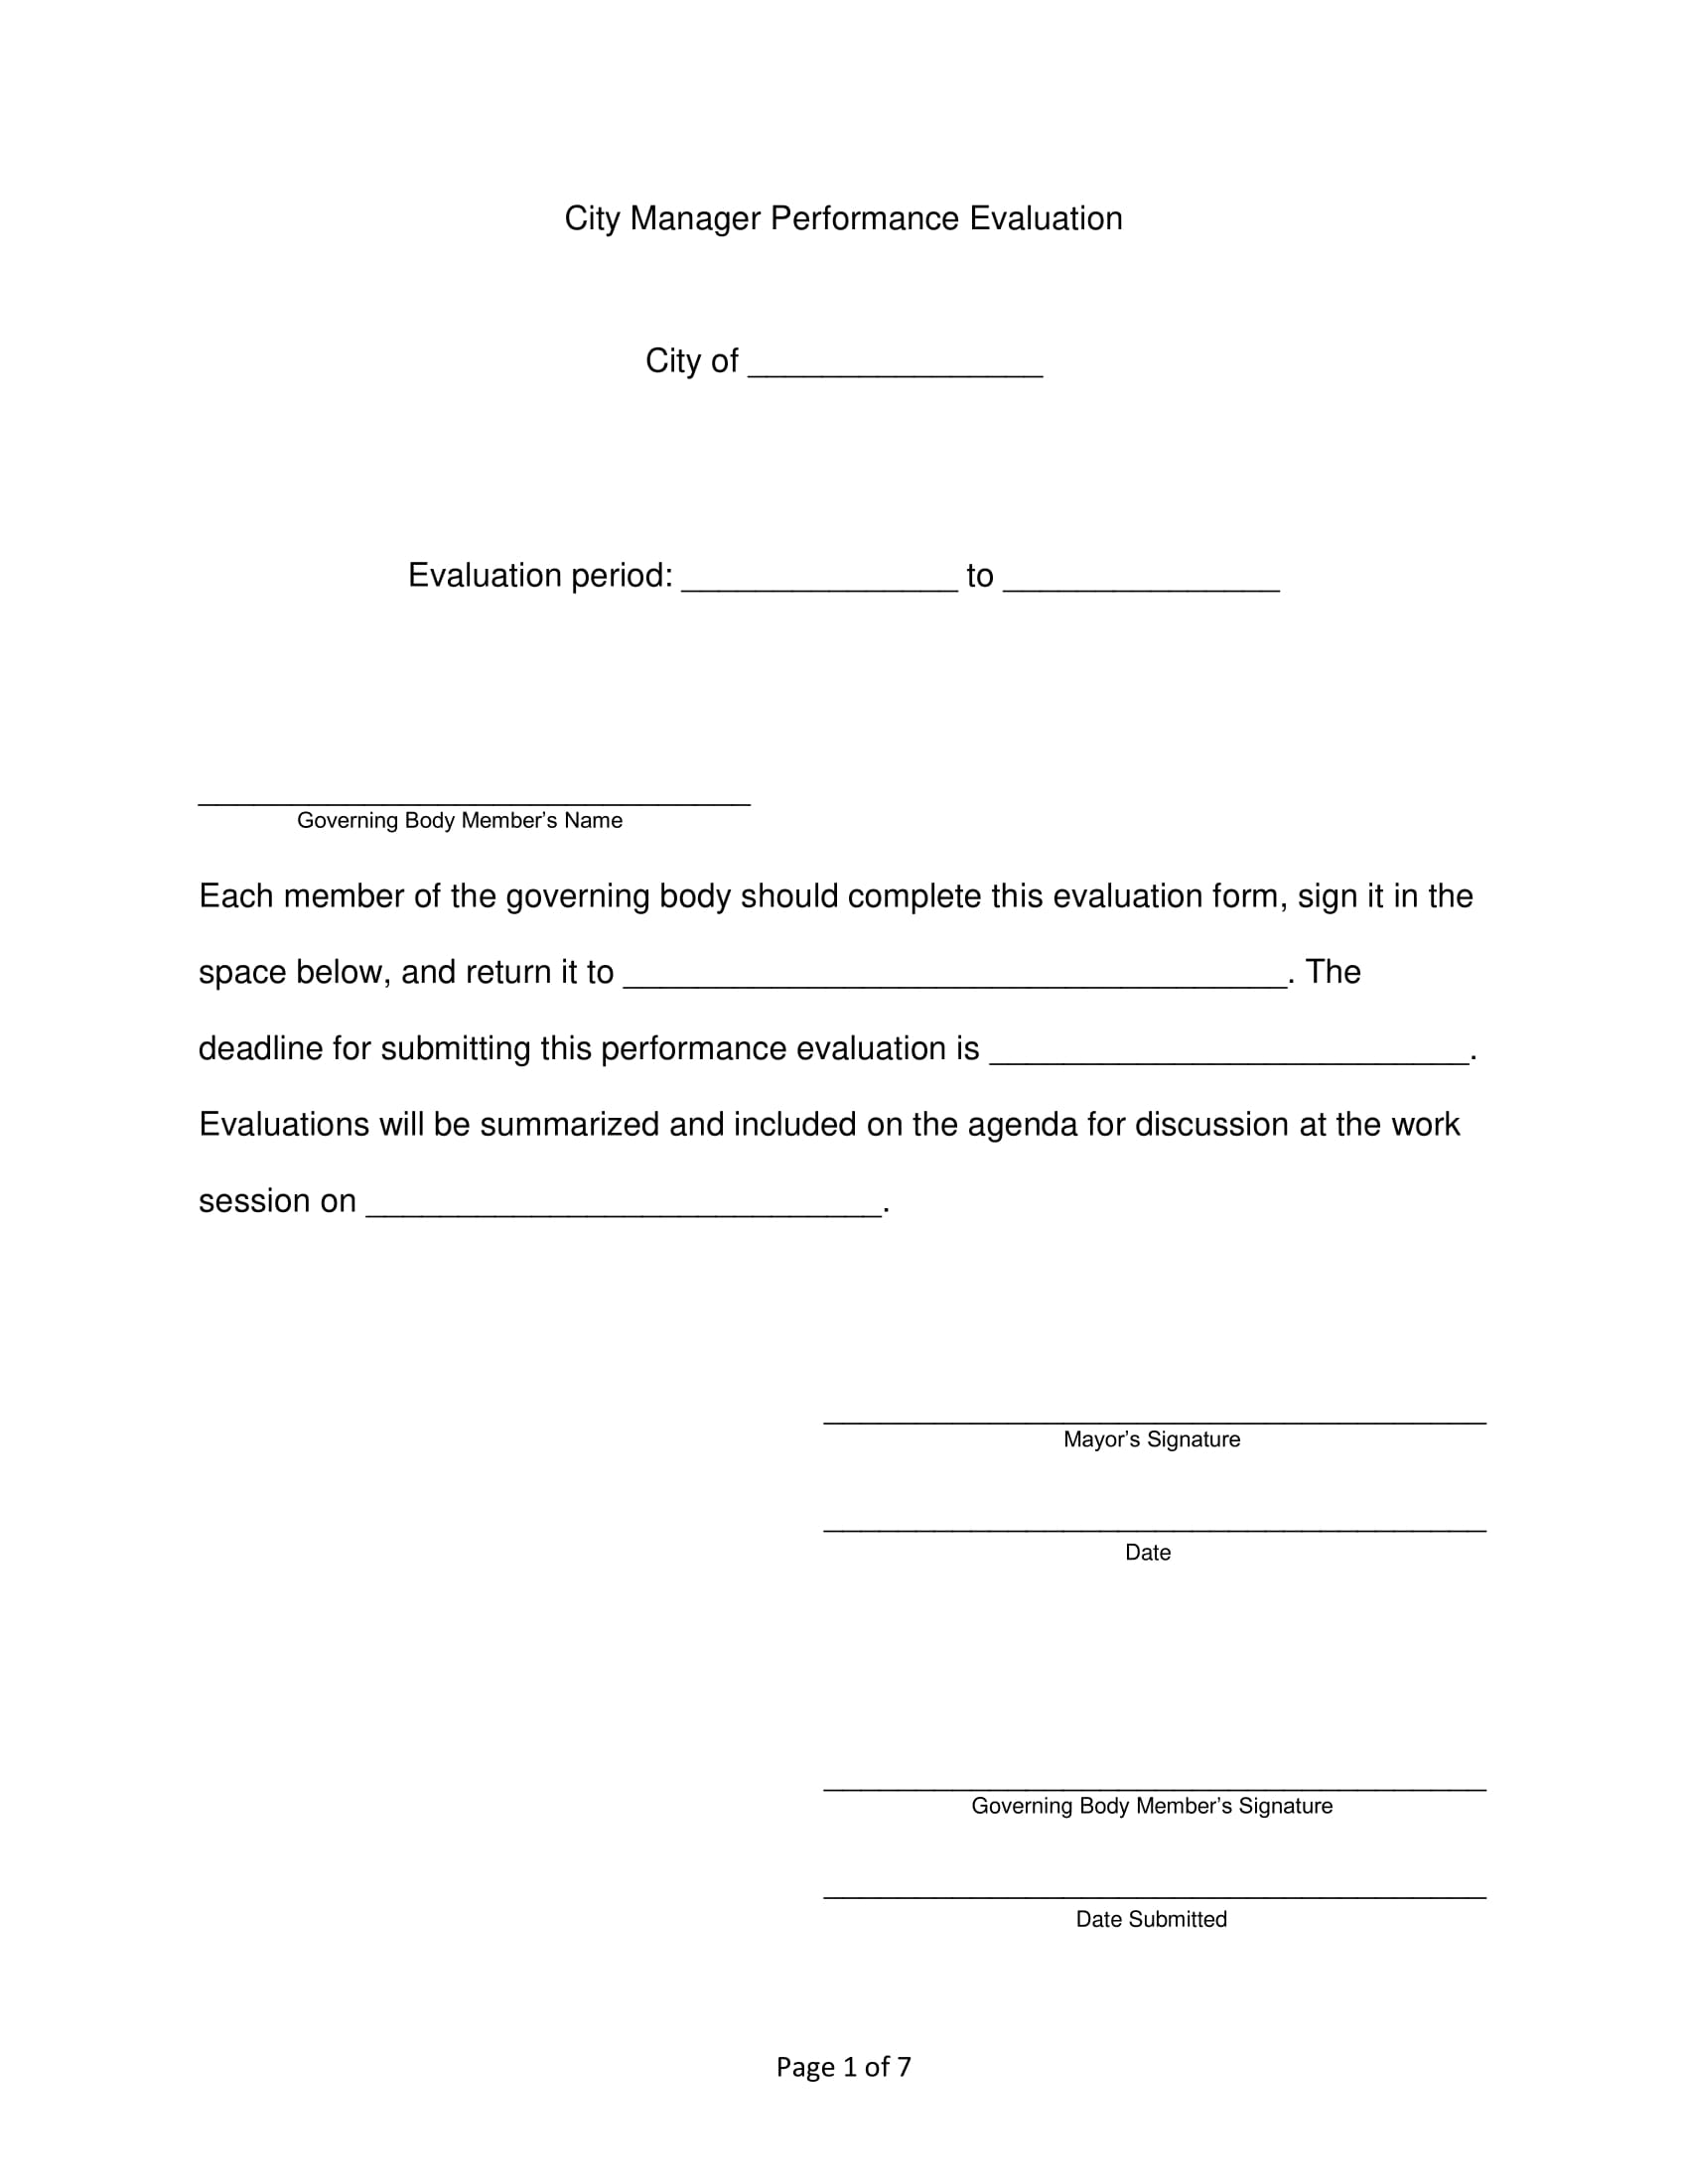 city manager performance evaluation form 1